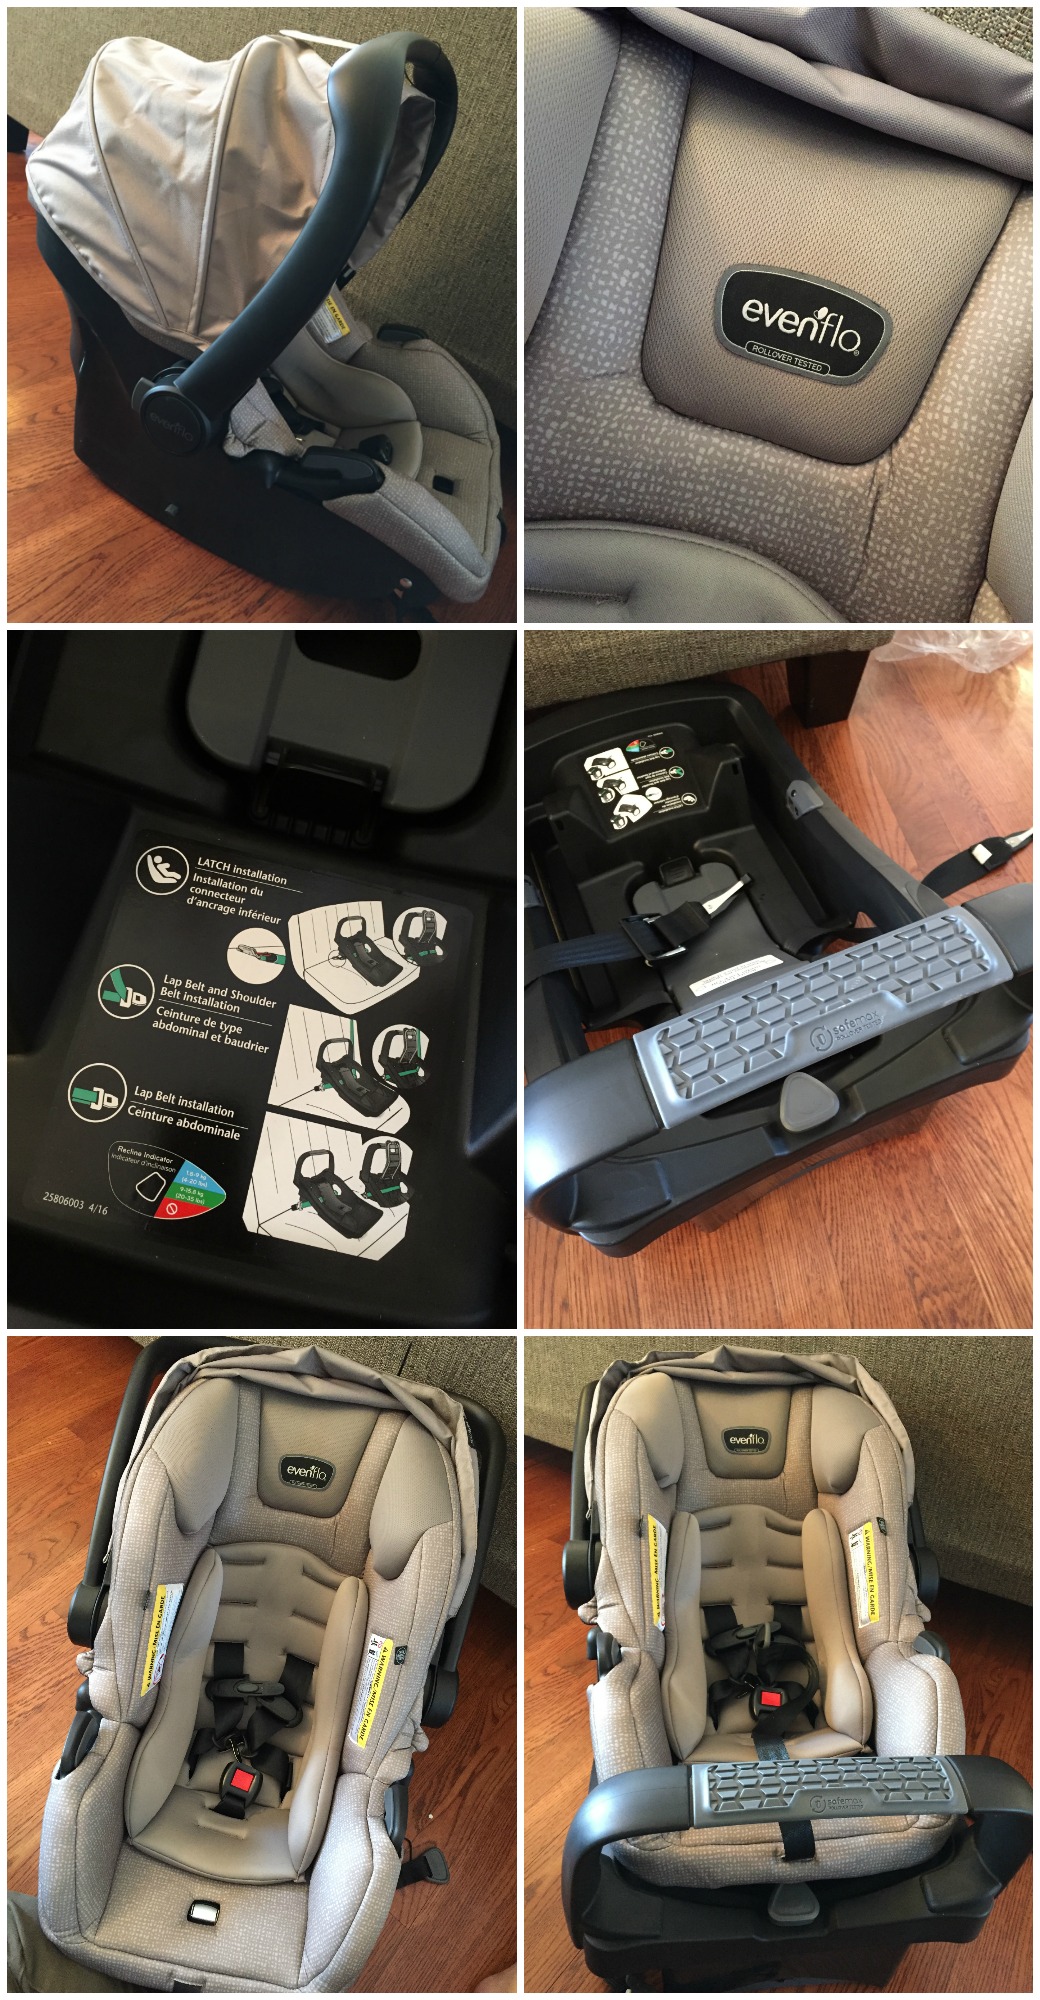 evenflo pivot car seat and stroller